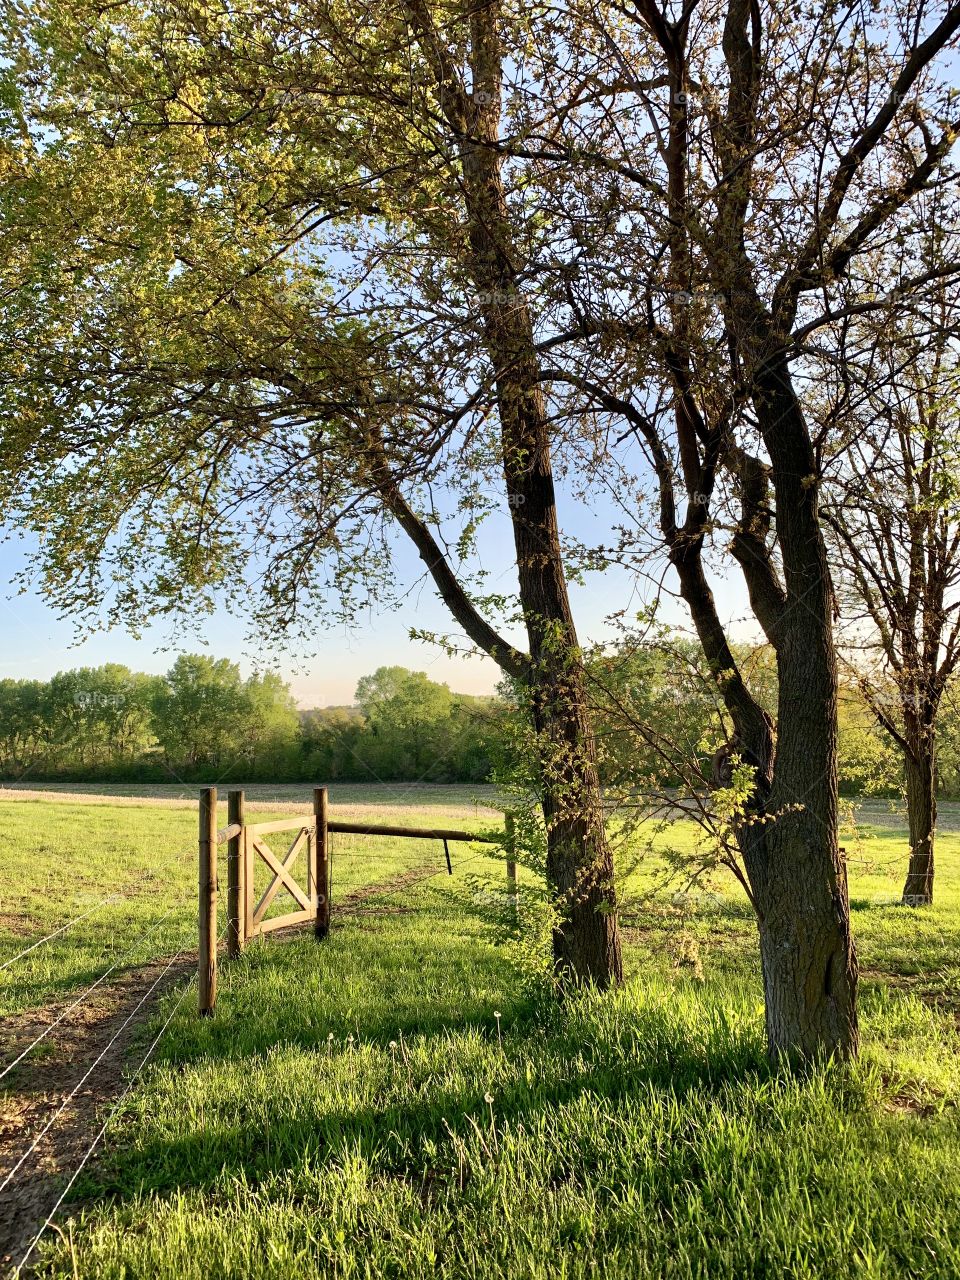  View of a wooden gate on a wire fence leading into a pasture, with a distant grove of trees in the background (portrait)